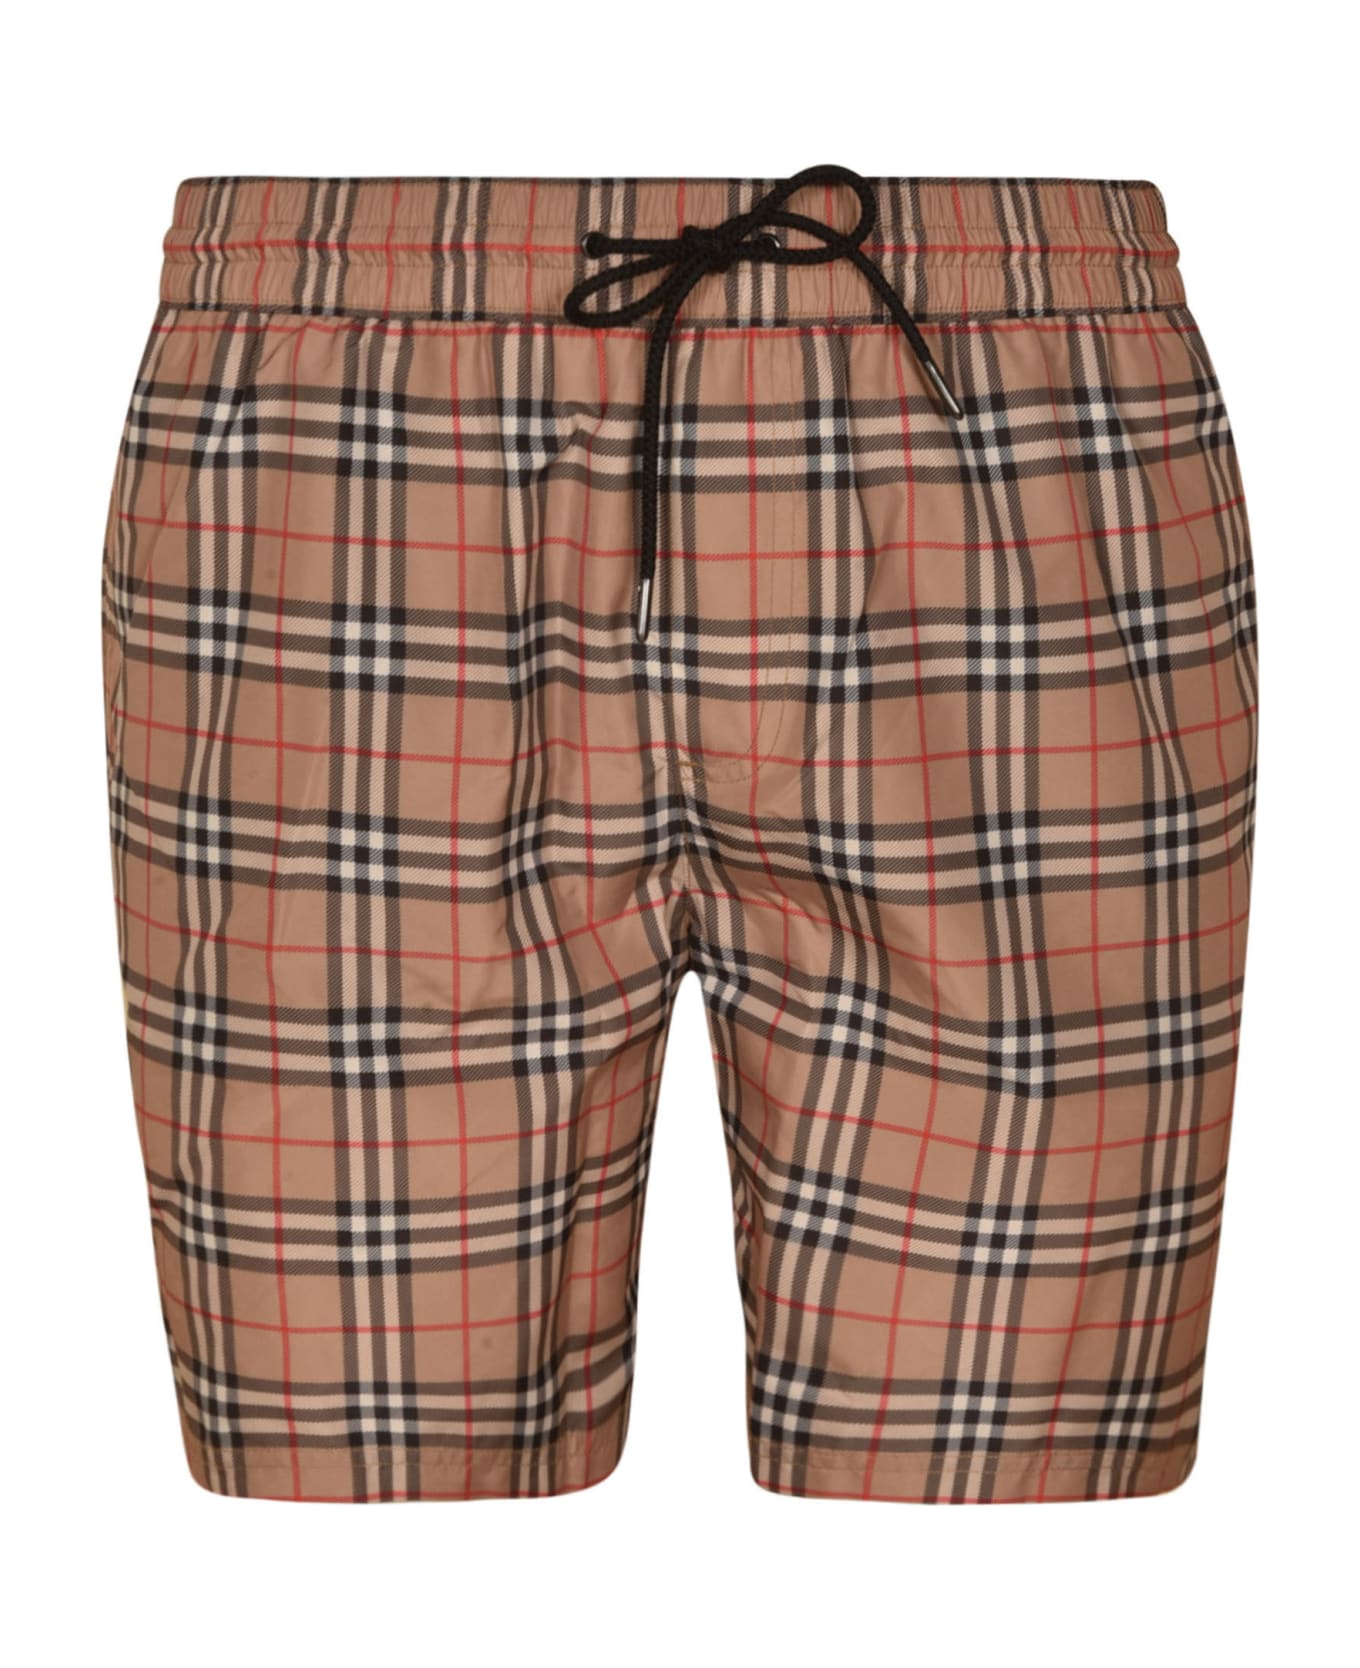 Burberry House Check Drawstring Waist Shorts - Archive Beige Ip Chk